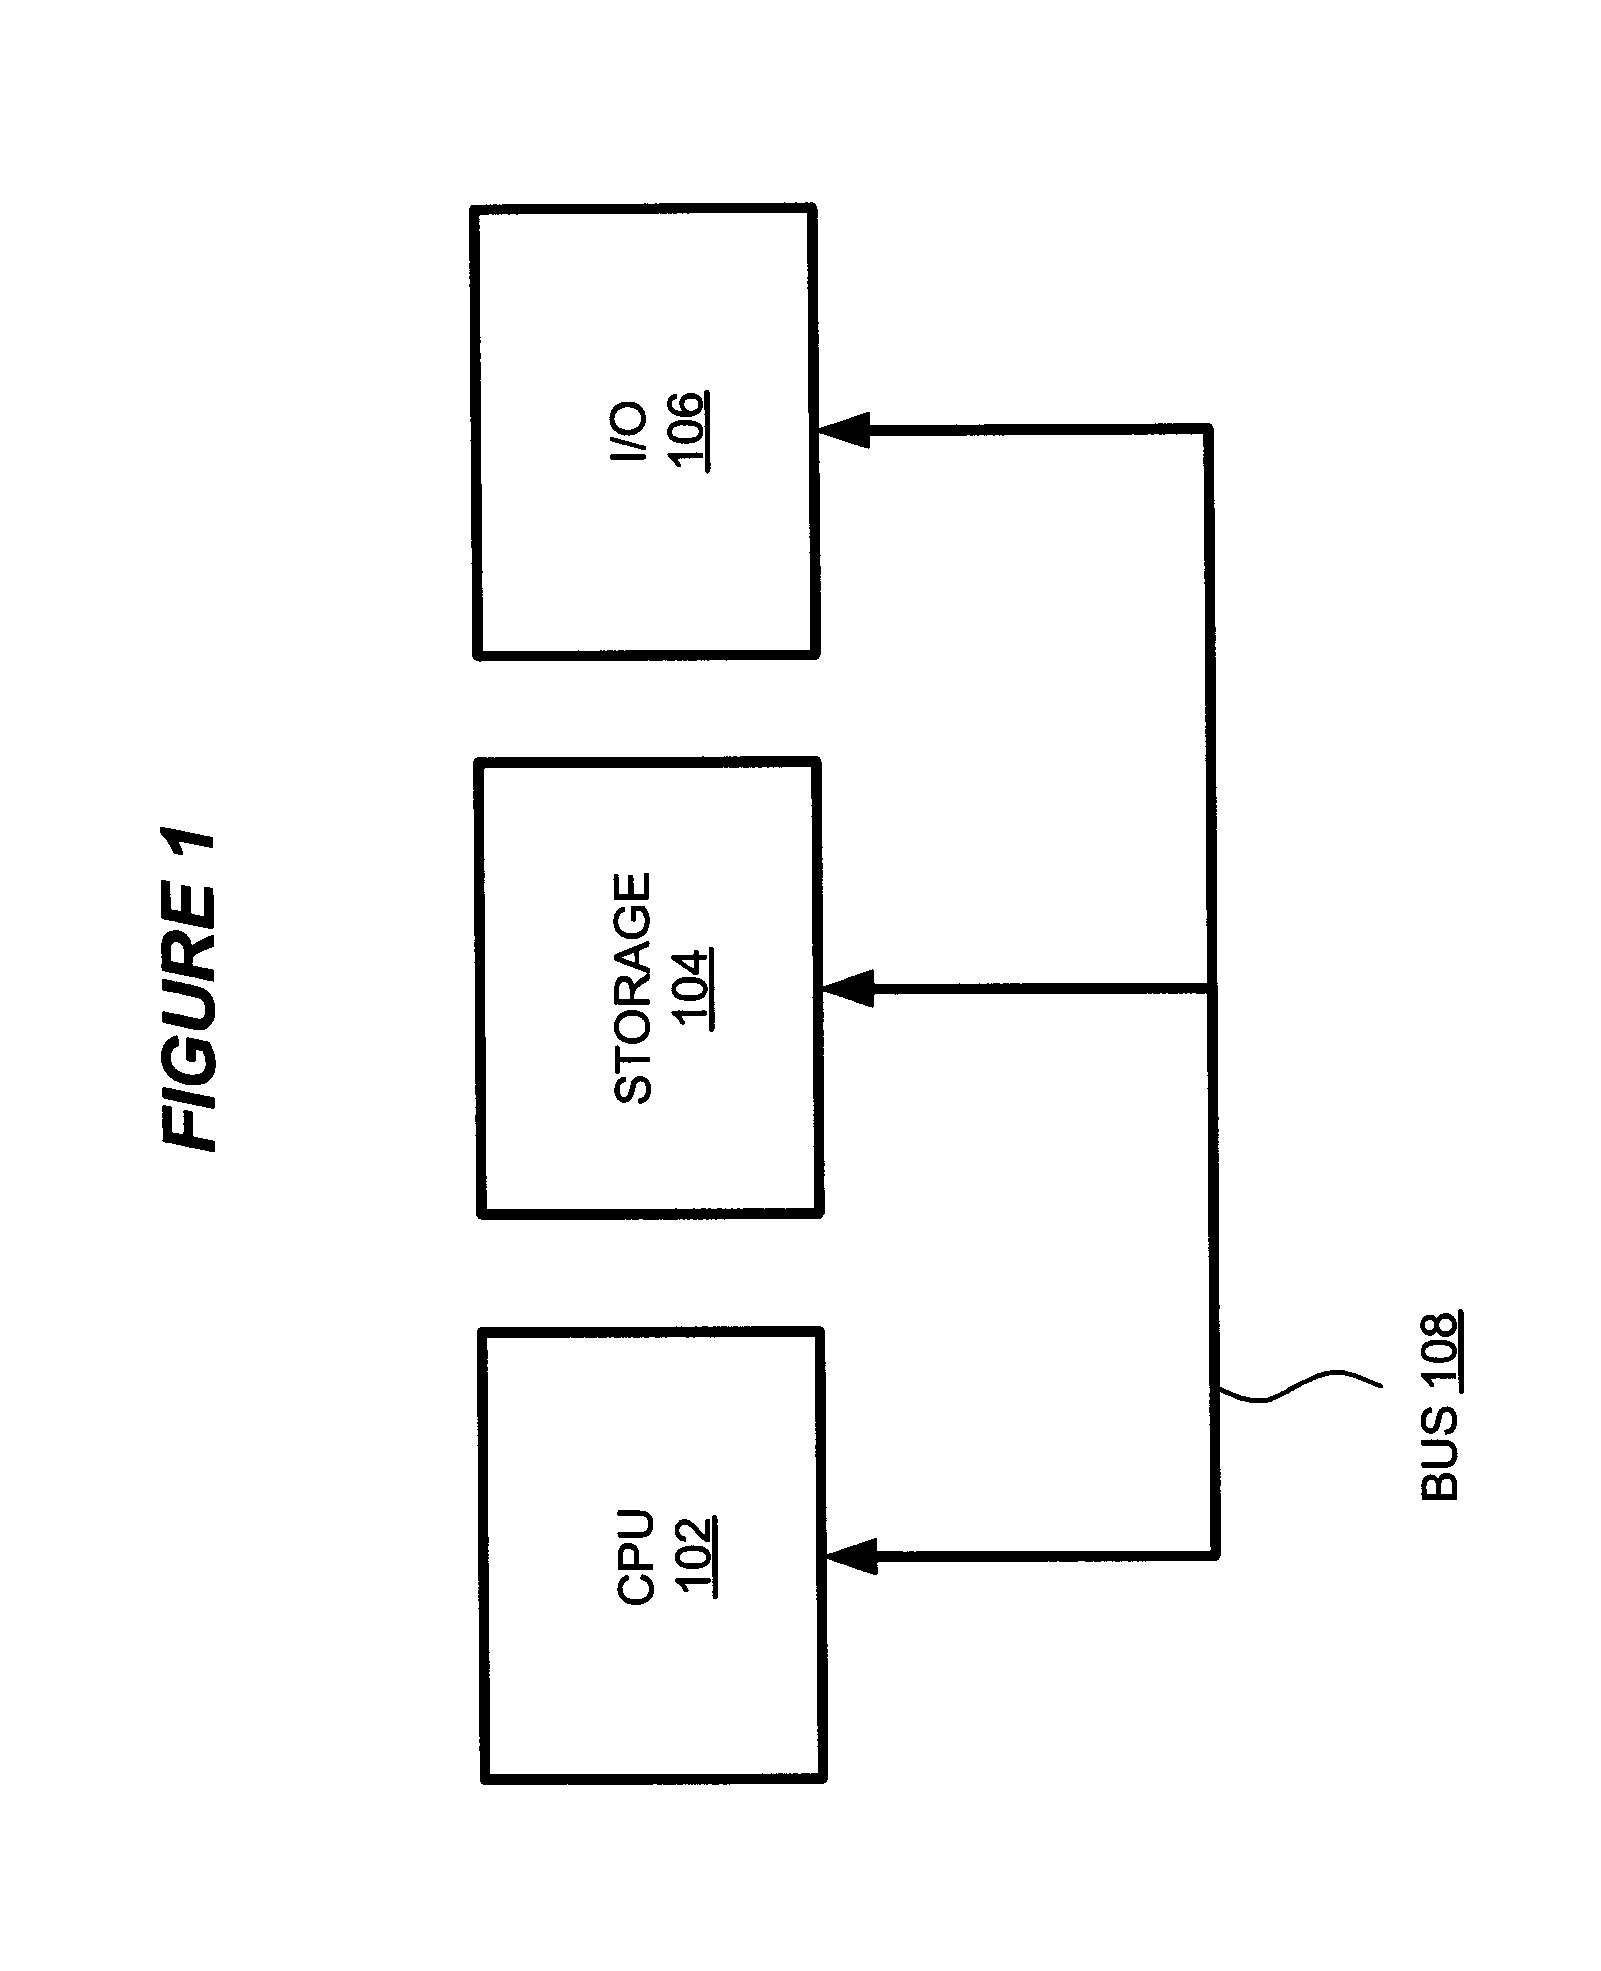 Activity Recording System for a Concurrent Software Environment